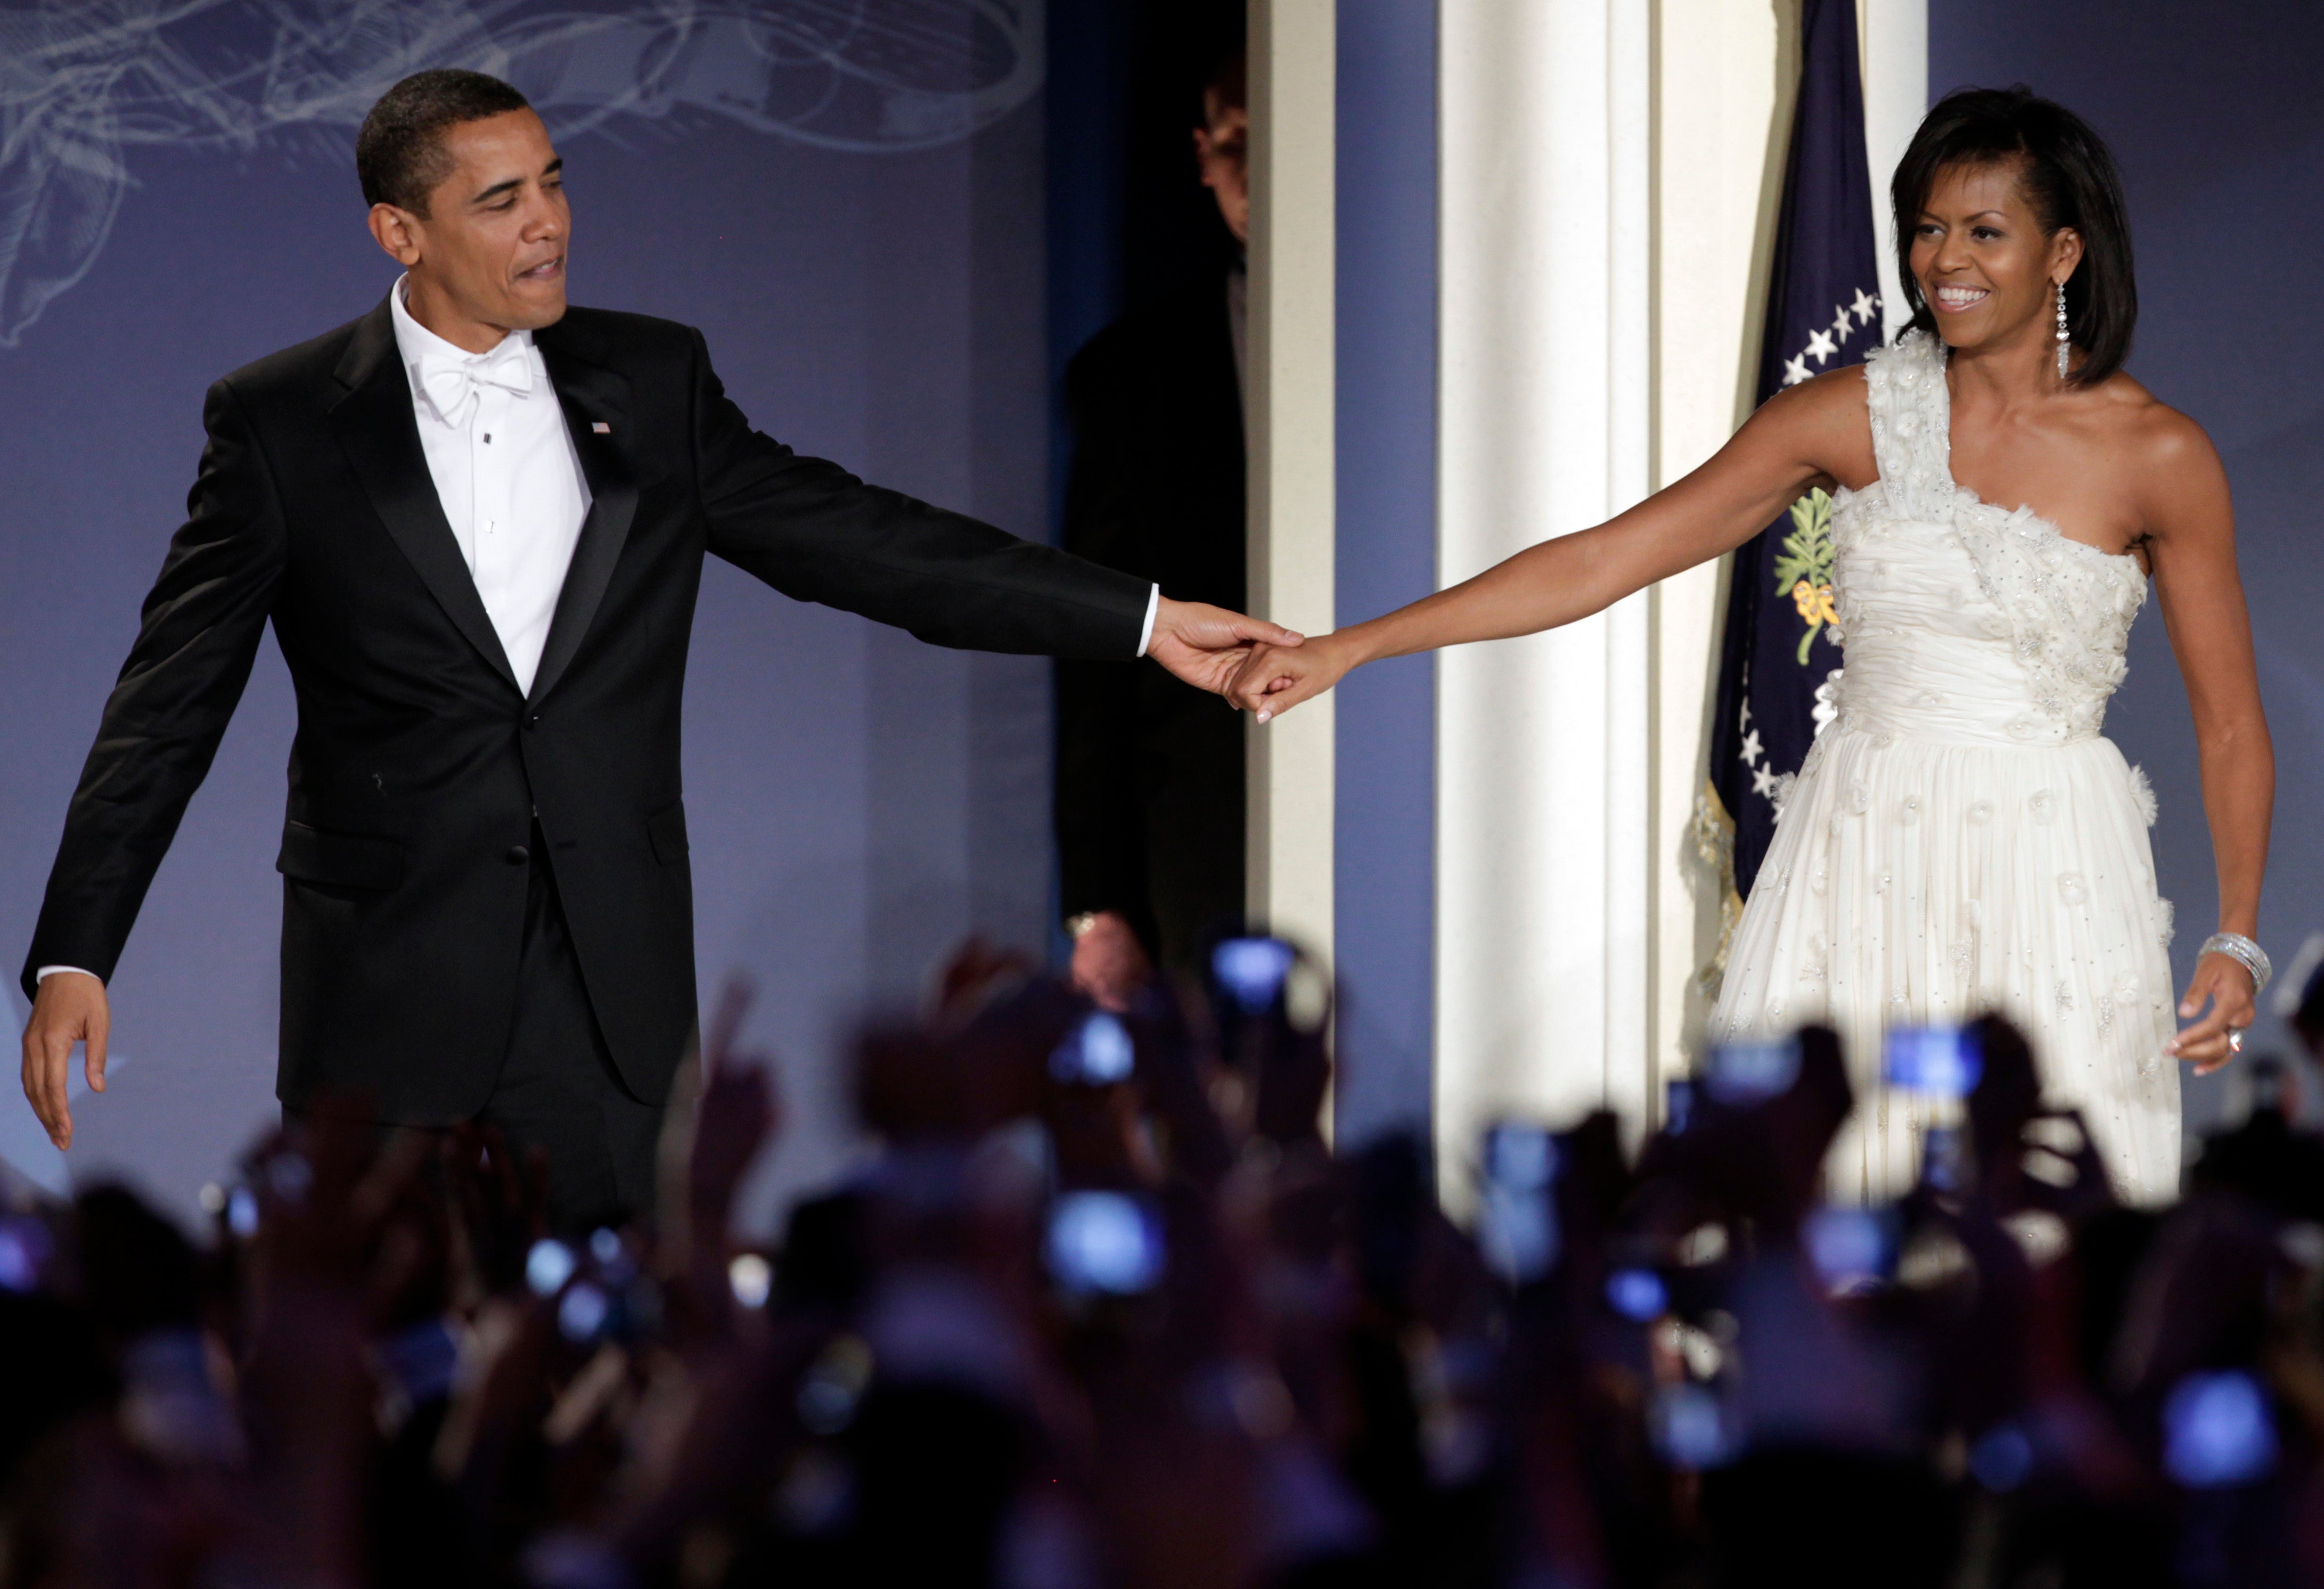 All Of The Times President Barack Obama Professed His Love For The First Lady
